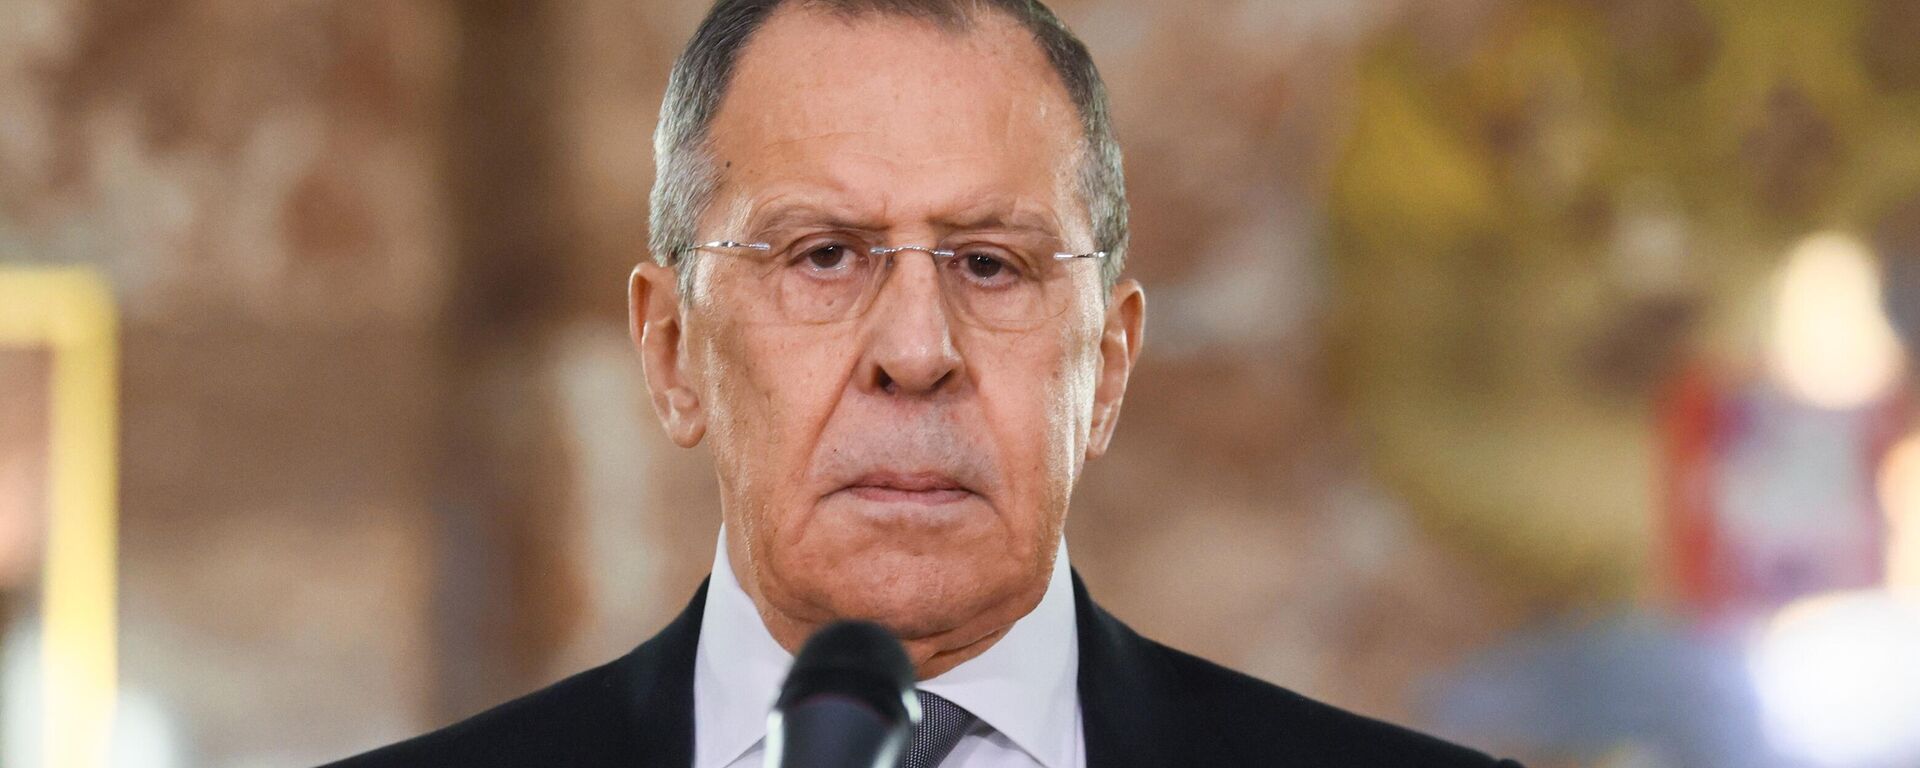 Russian Foreign Minister Sergei Lavrov at a Foreign Ministry ceremony in Moscow on February 10, 2023. - Sputnik Africa, 1920, 24.04.2023